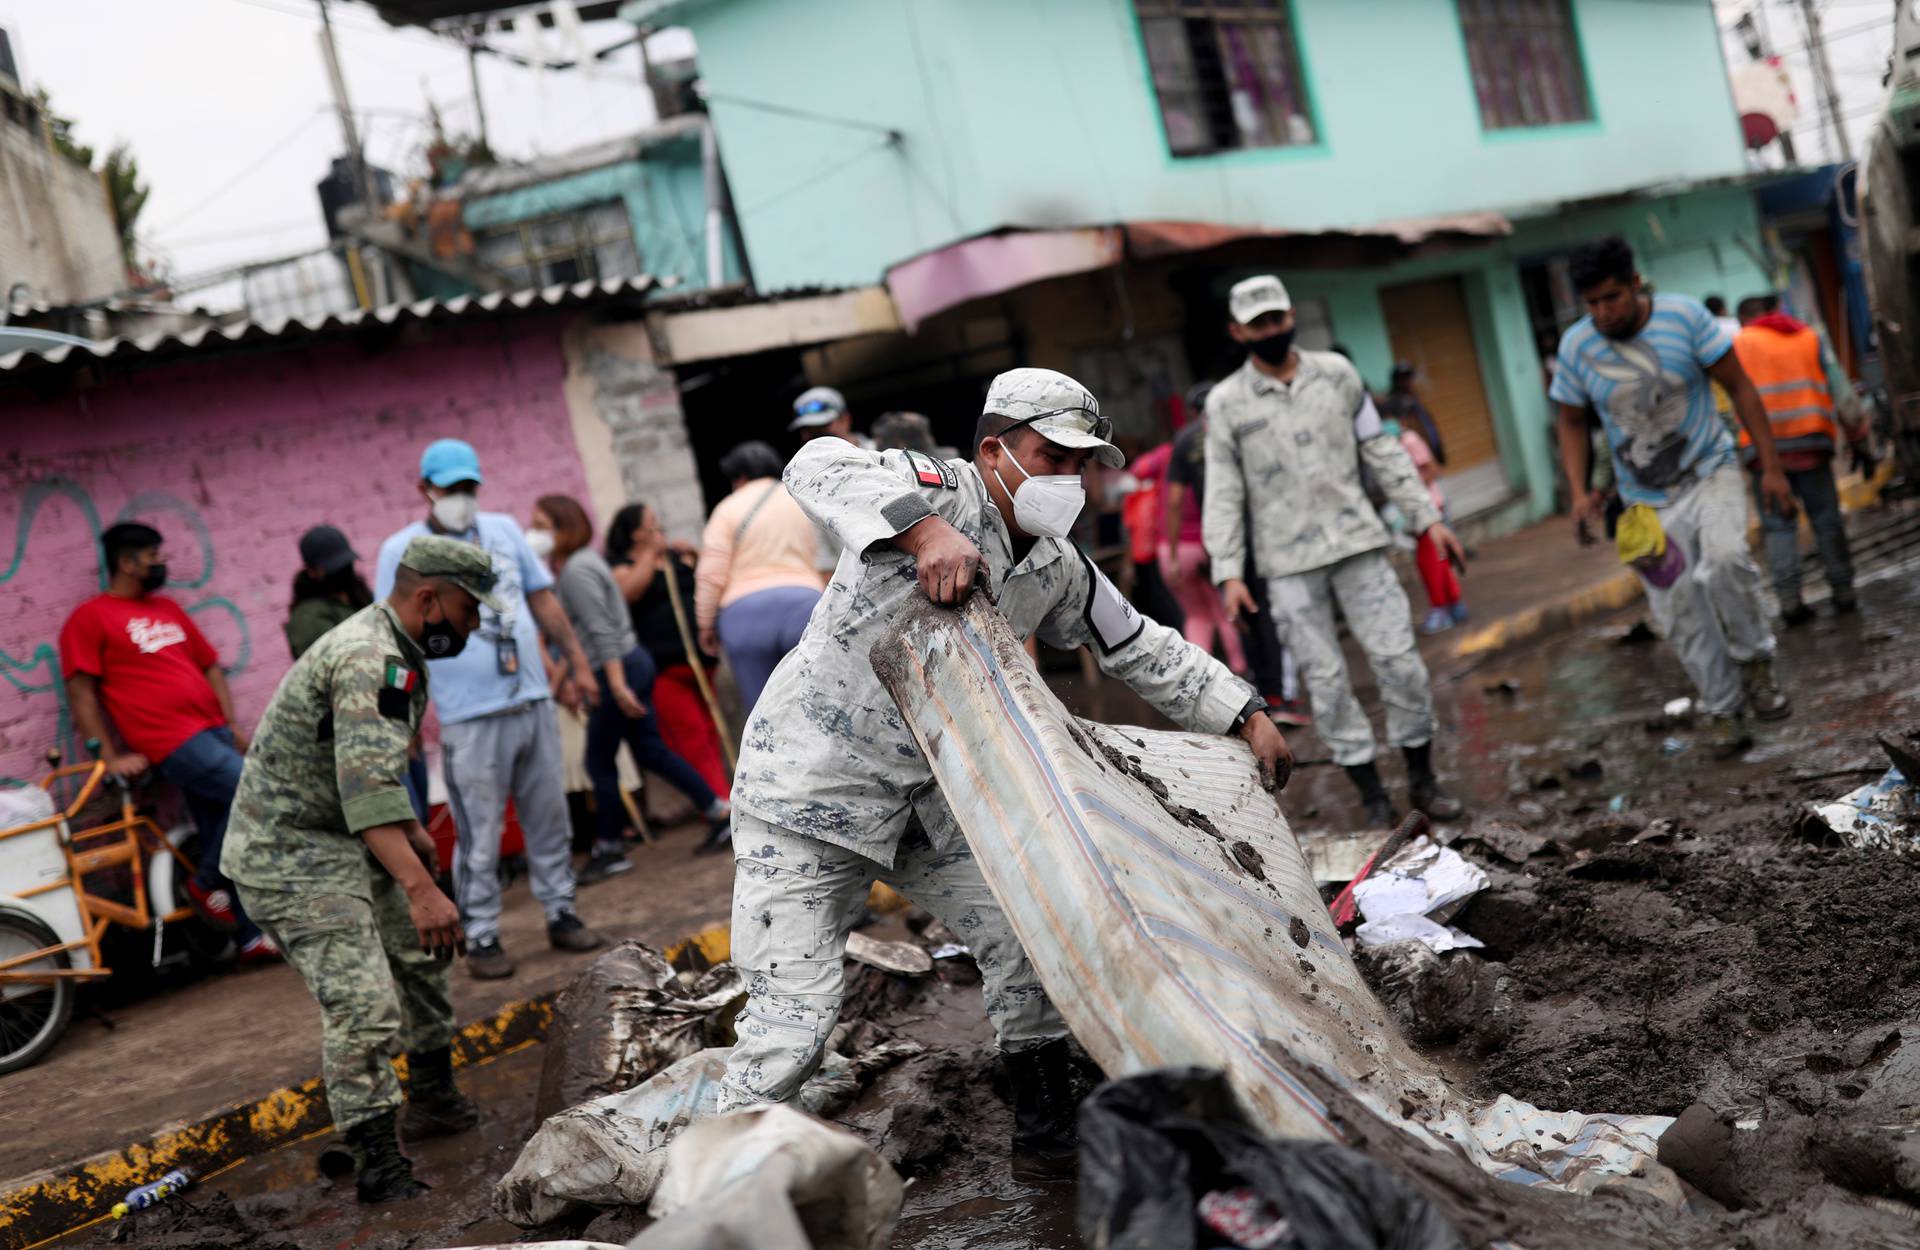 People clean up debris of the damage caused by heavy rainfall in the municipality of Ecatepec